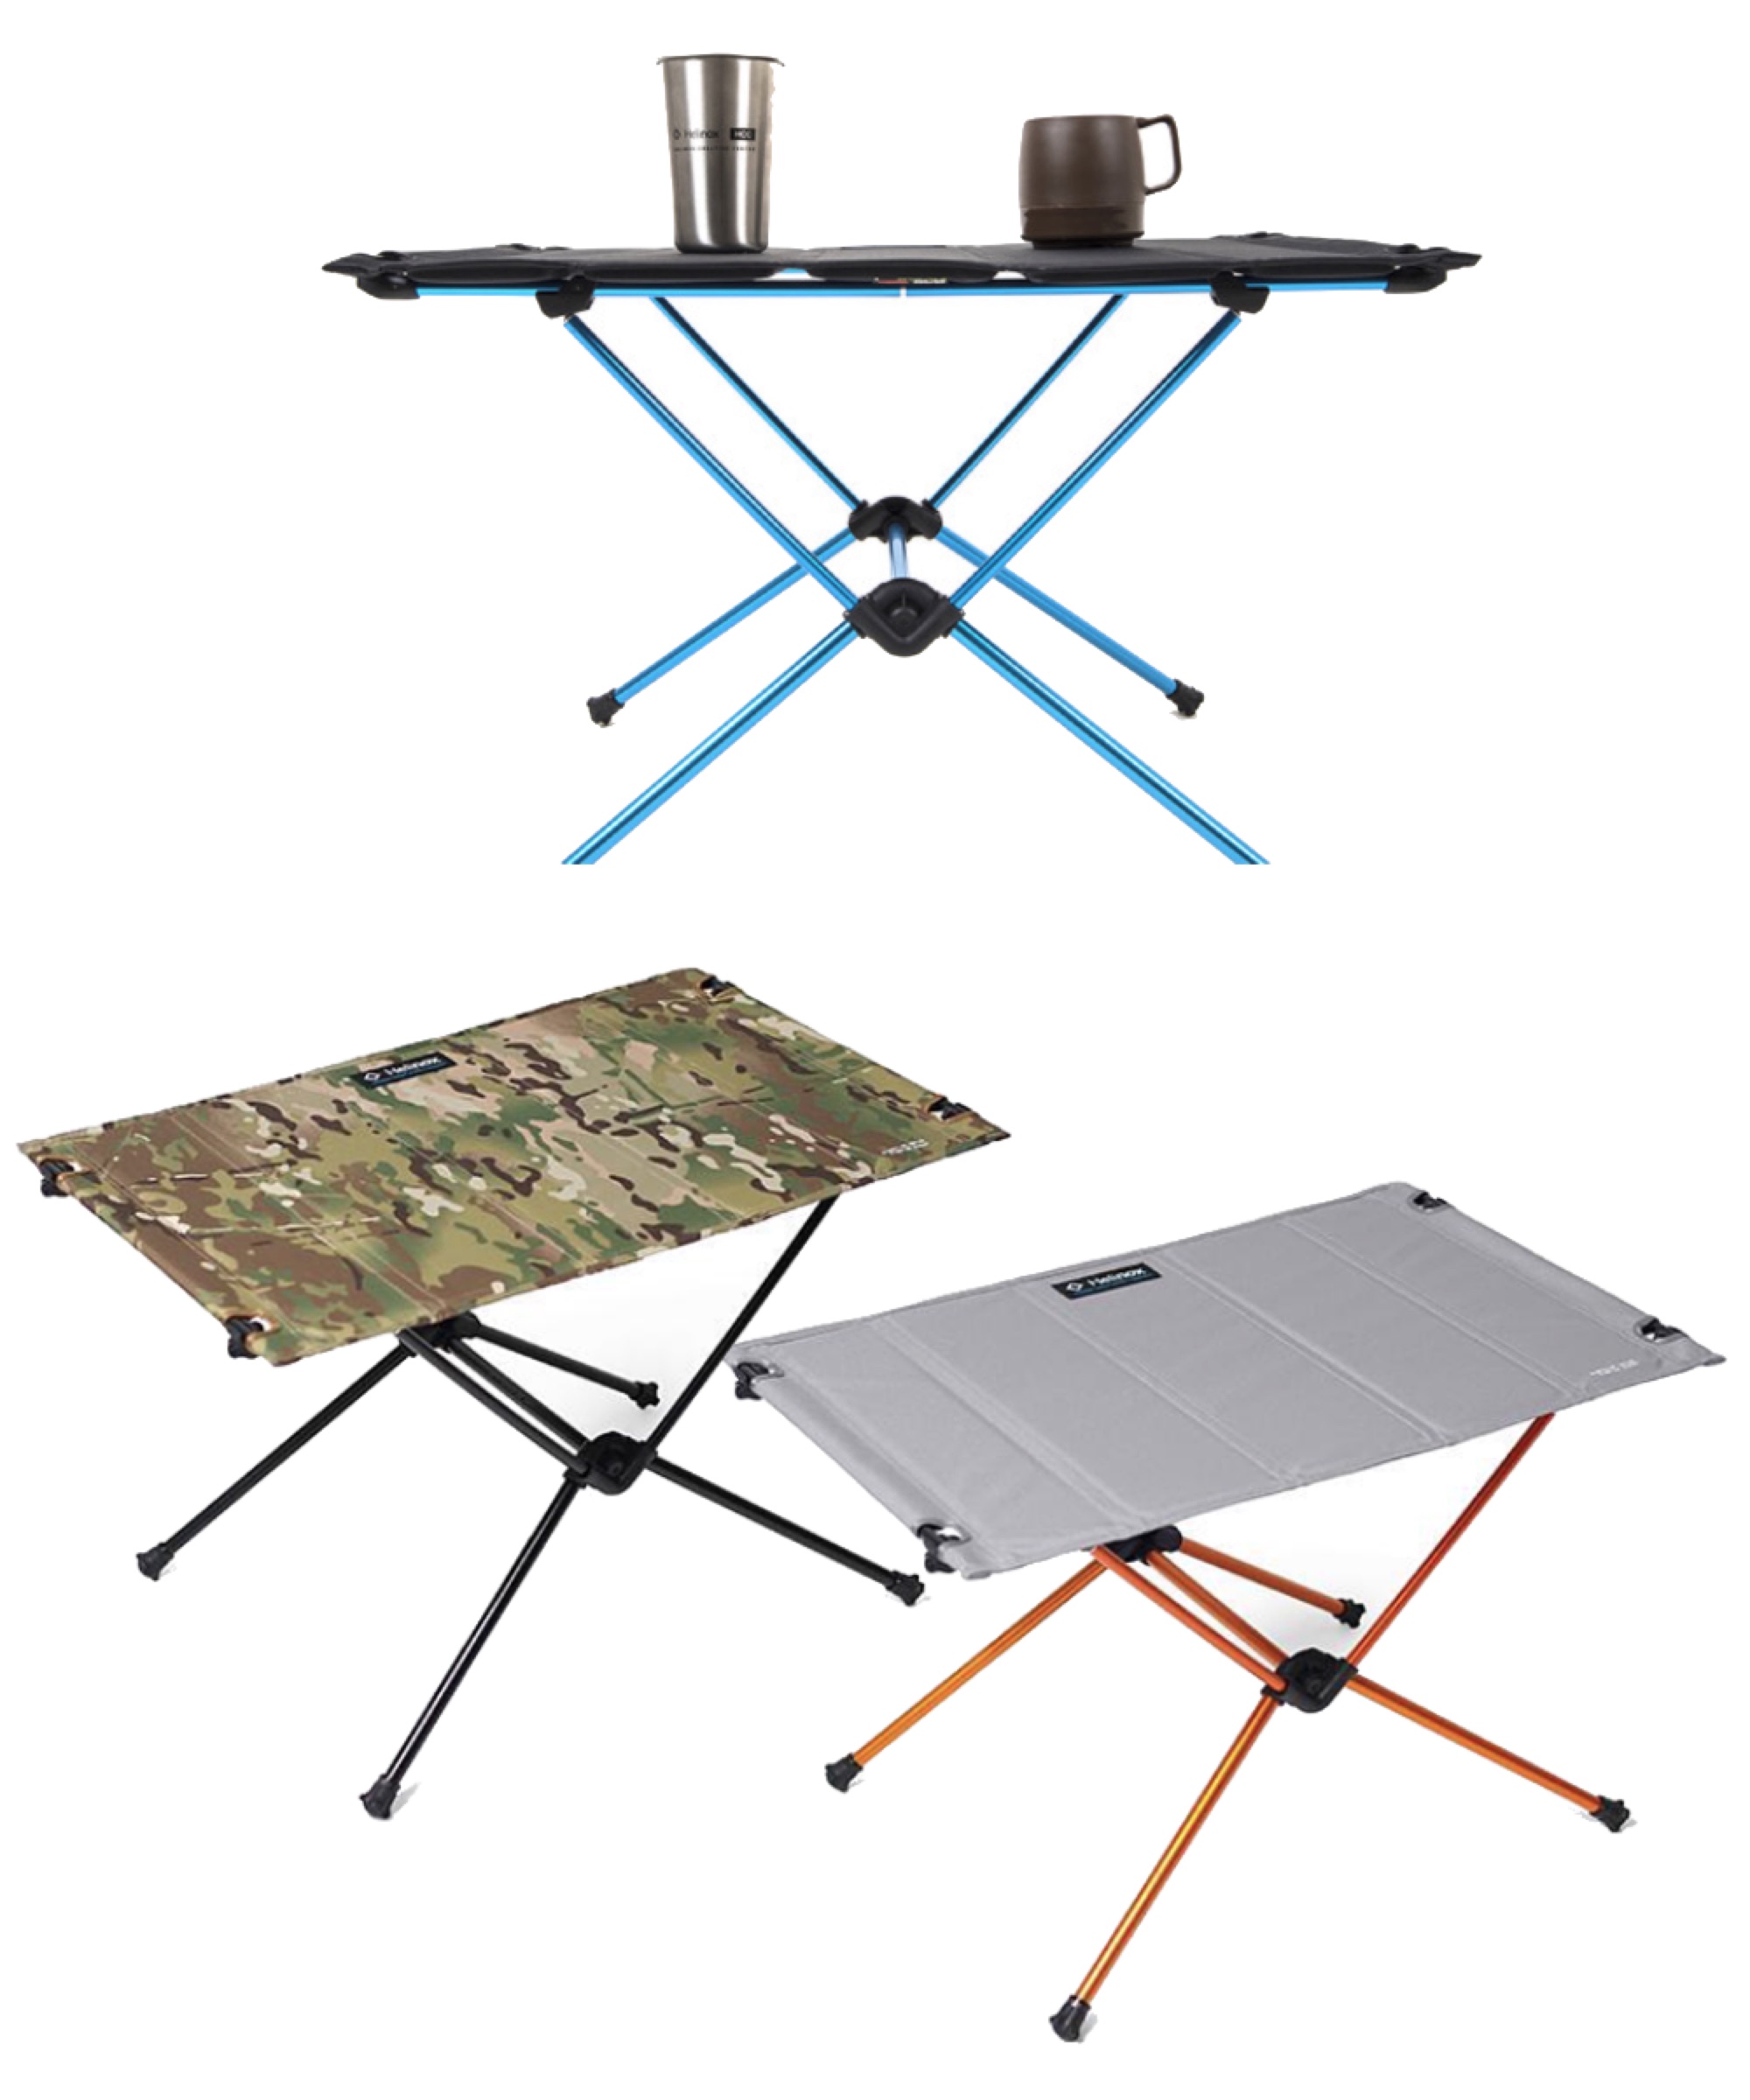 Portable Lightweight Helinox Table O Circular Collapsible Outdoor Camping Table